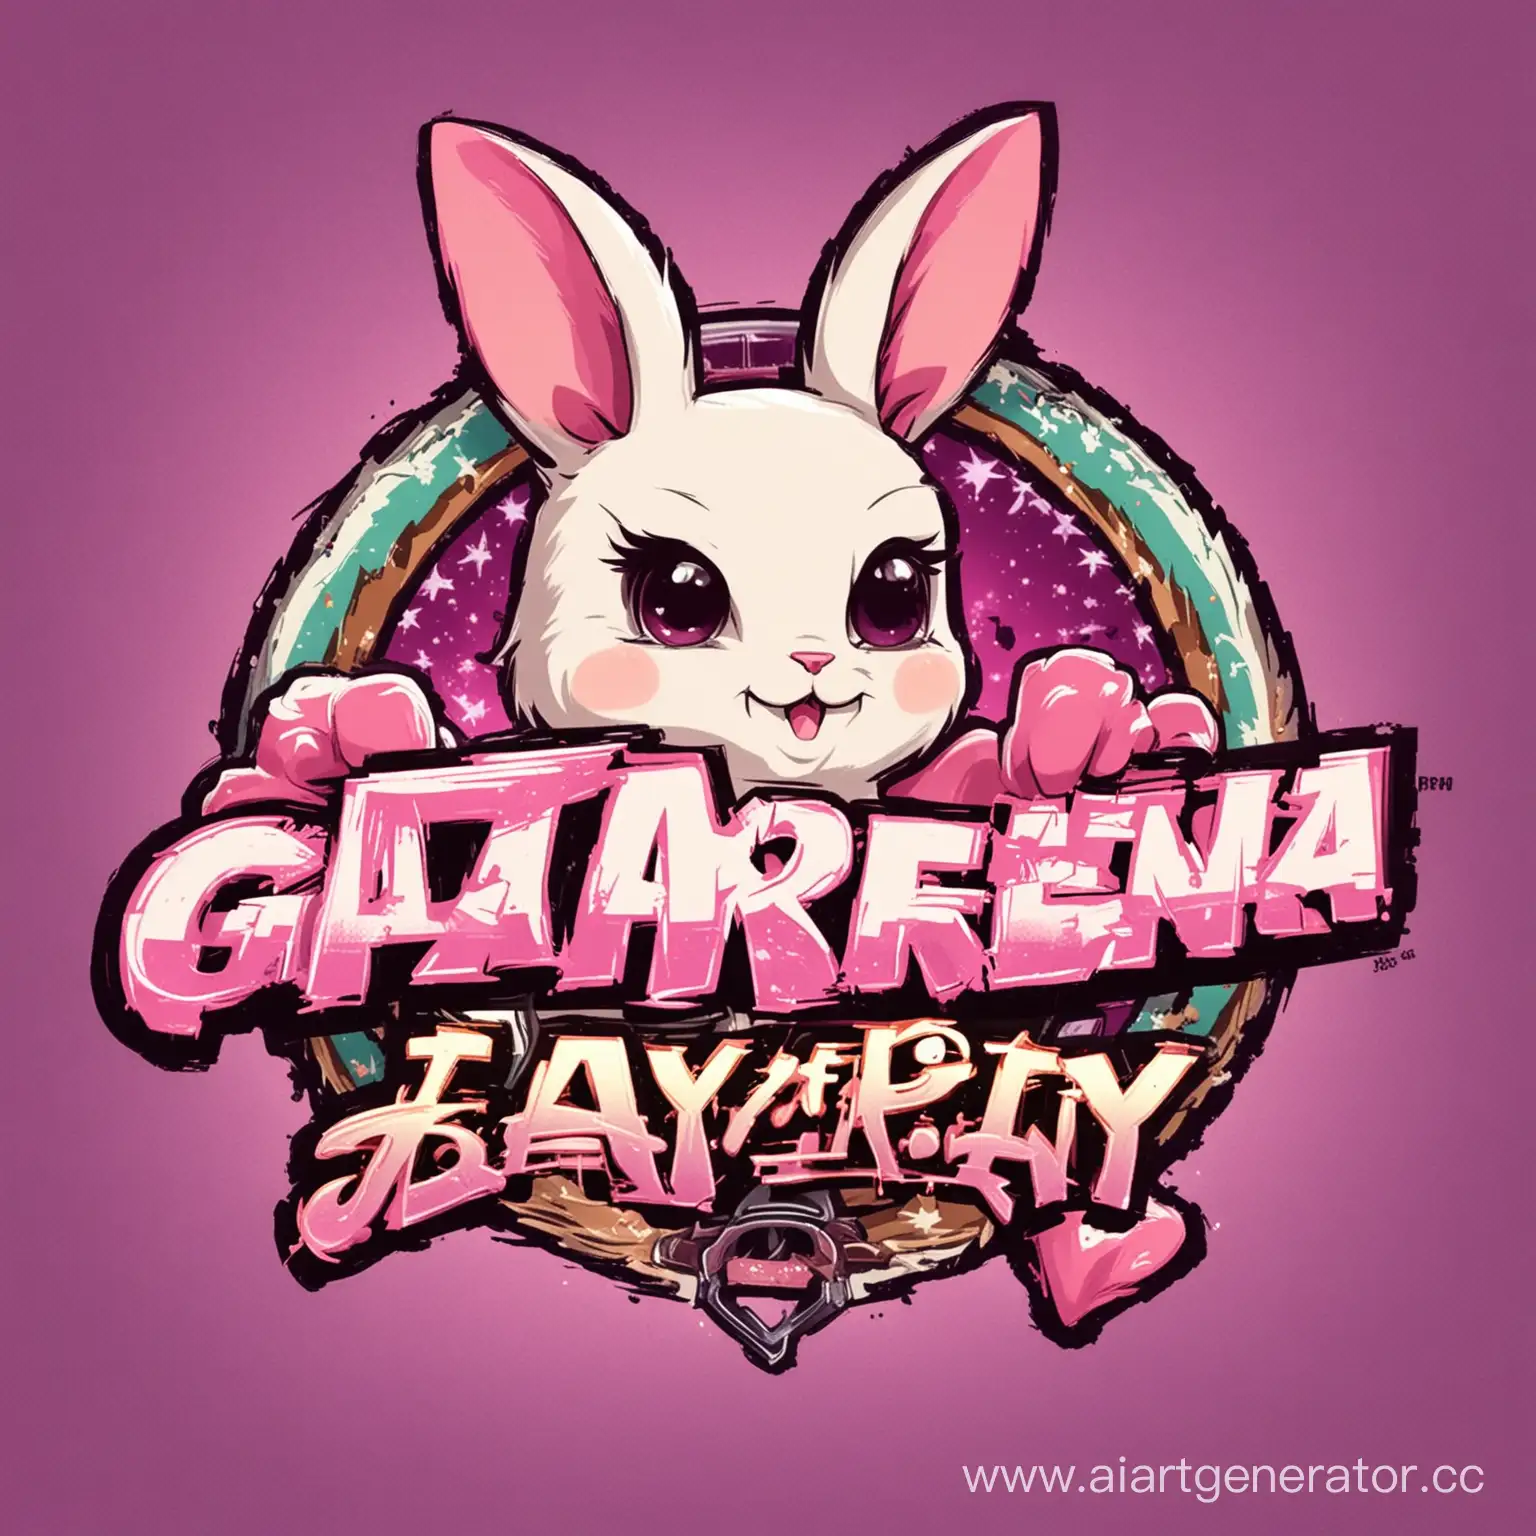 Xayreena-Famq-Logo-for-GTA-5-RP-Game-in-Vibrant-Pink-with-Bunny